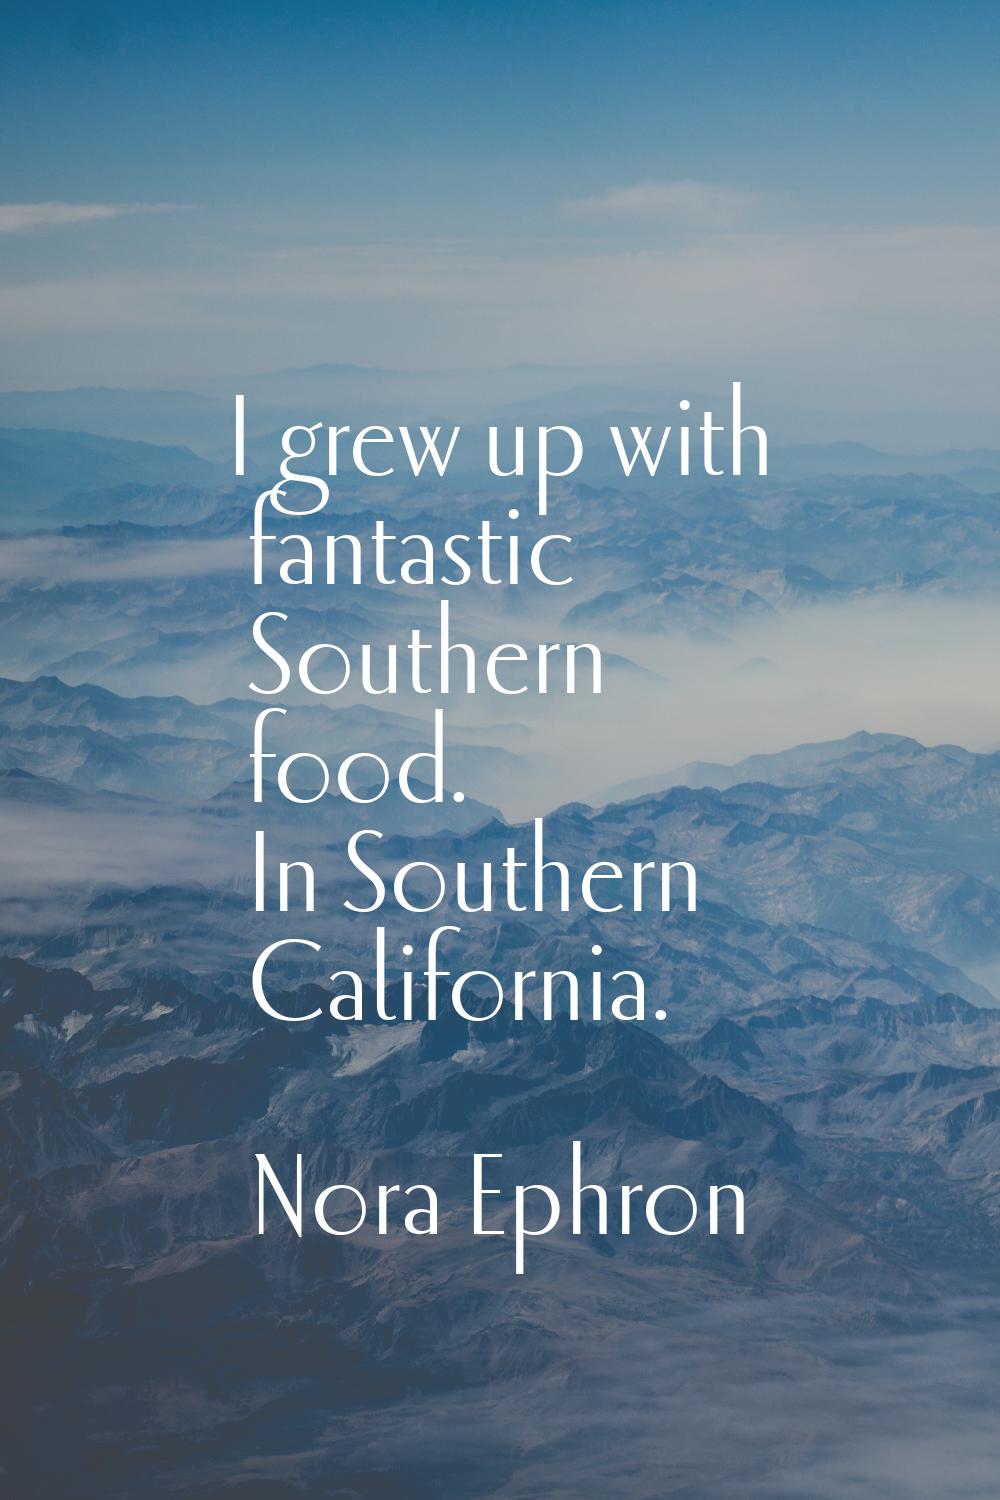 I grew up with fantastic Southern food. In Southern California.